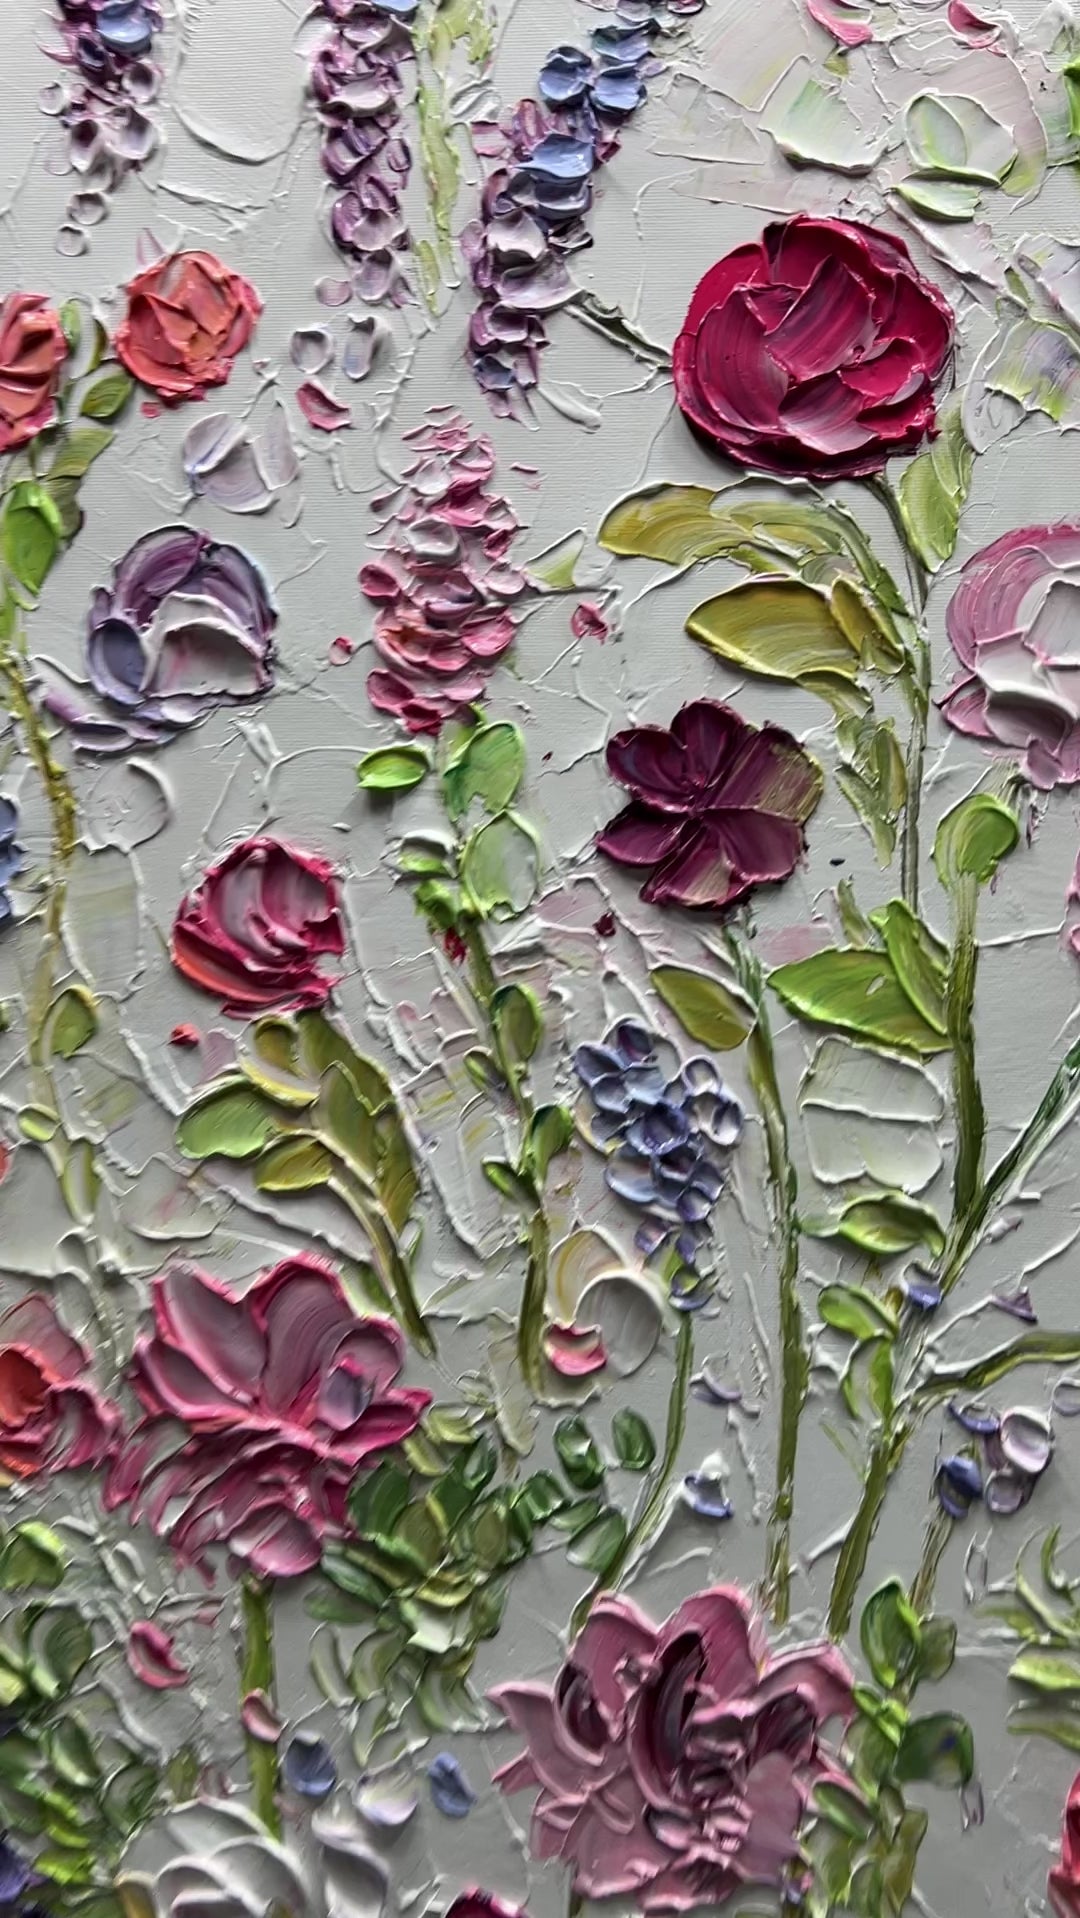 Wild Garden Textured 3D Floral Painting Textured Multicolor